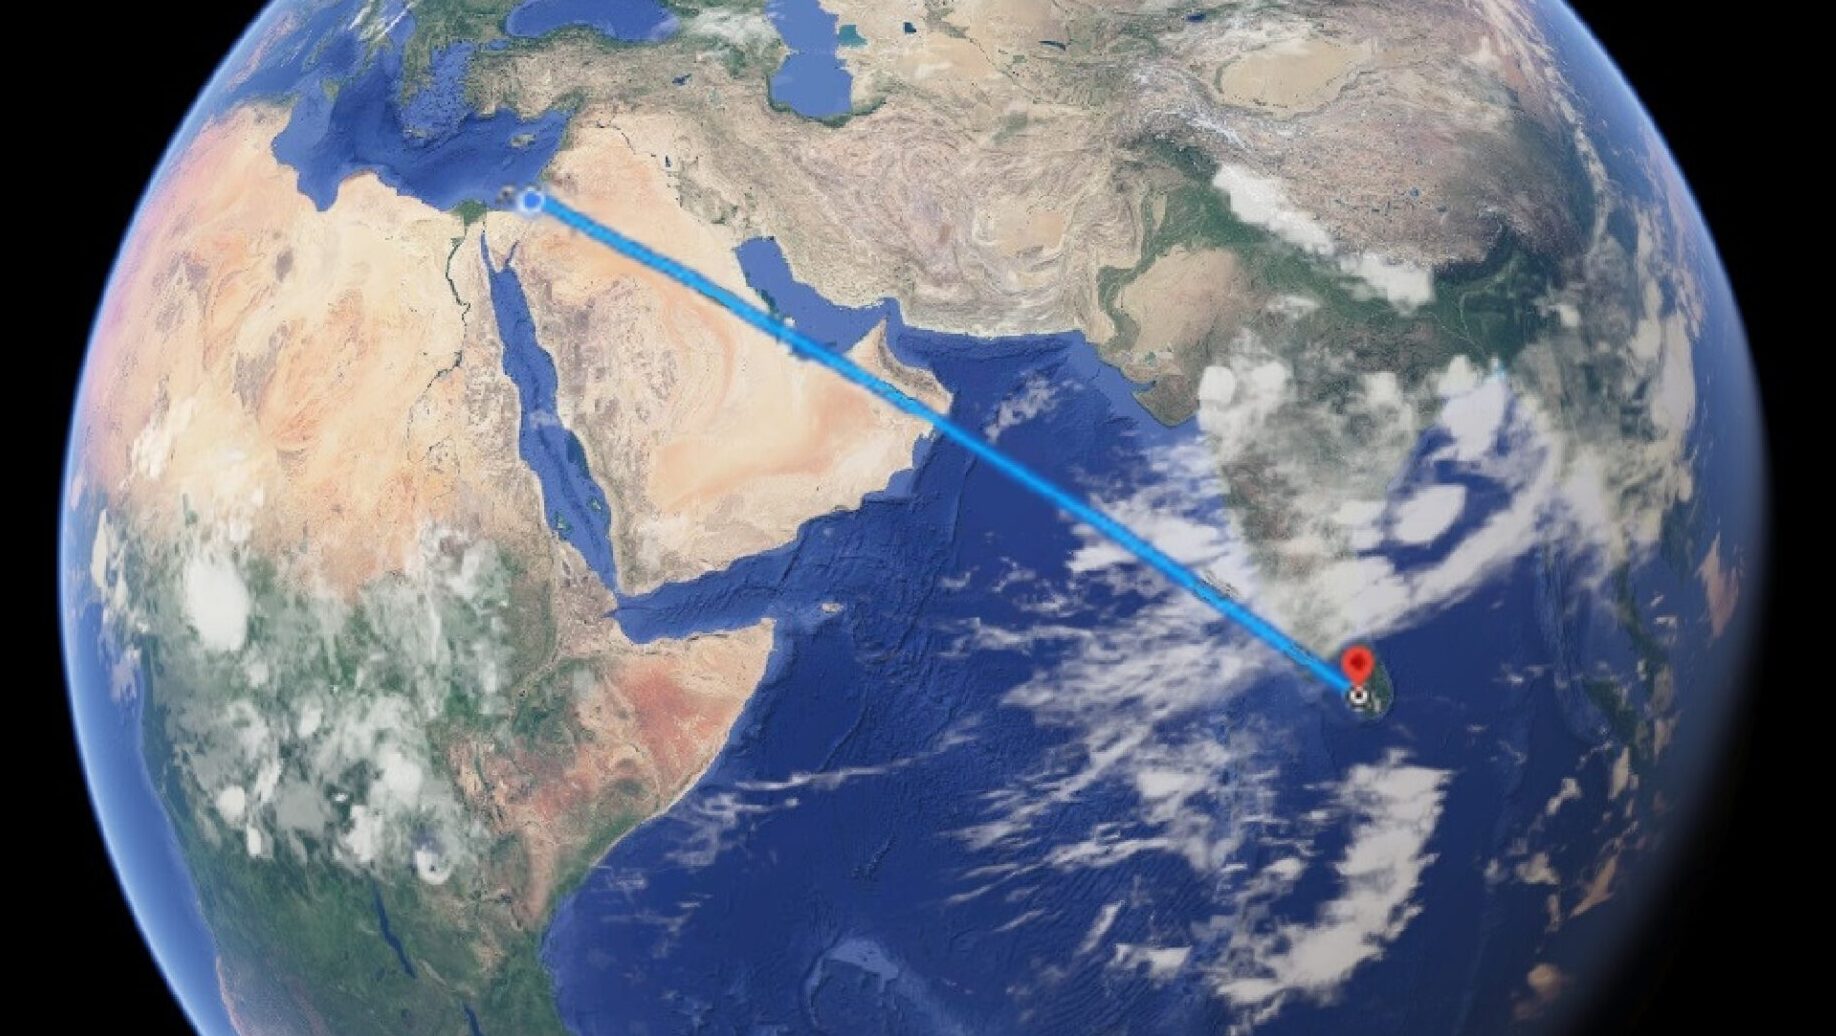 Arkia Launches Historic Direct Flight Route From Israel to Sri Lanka